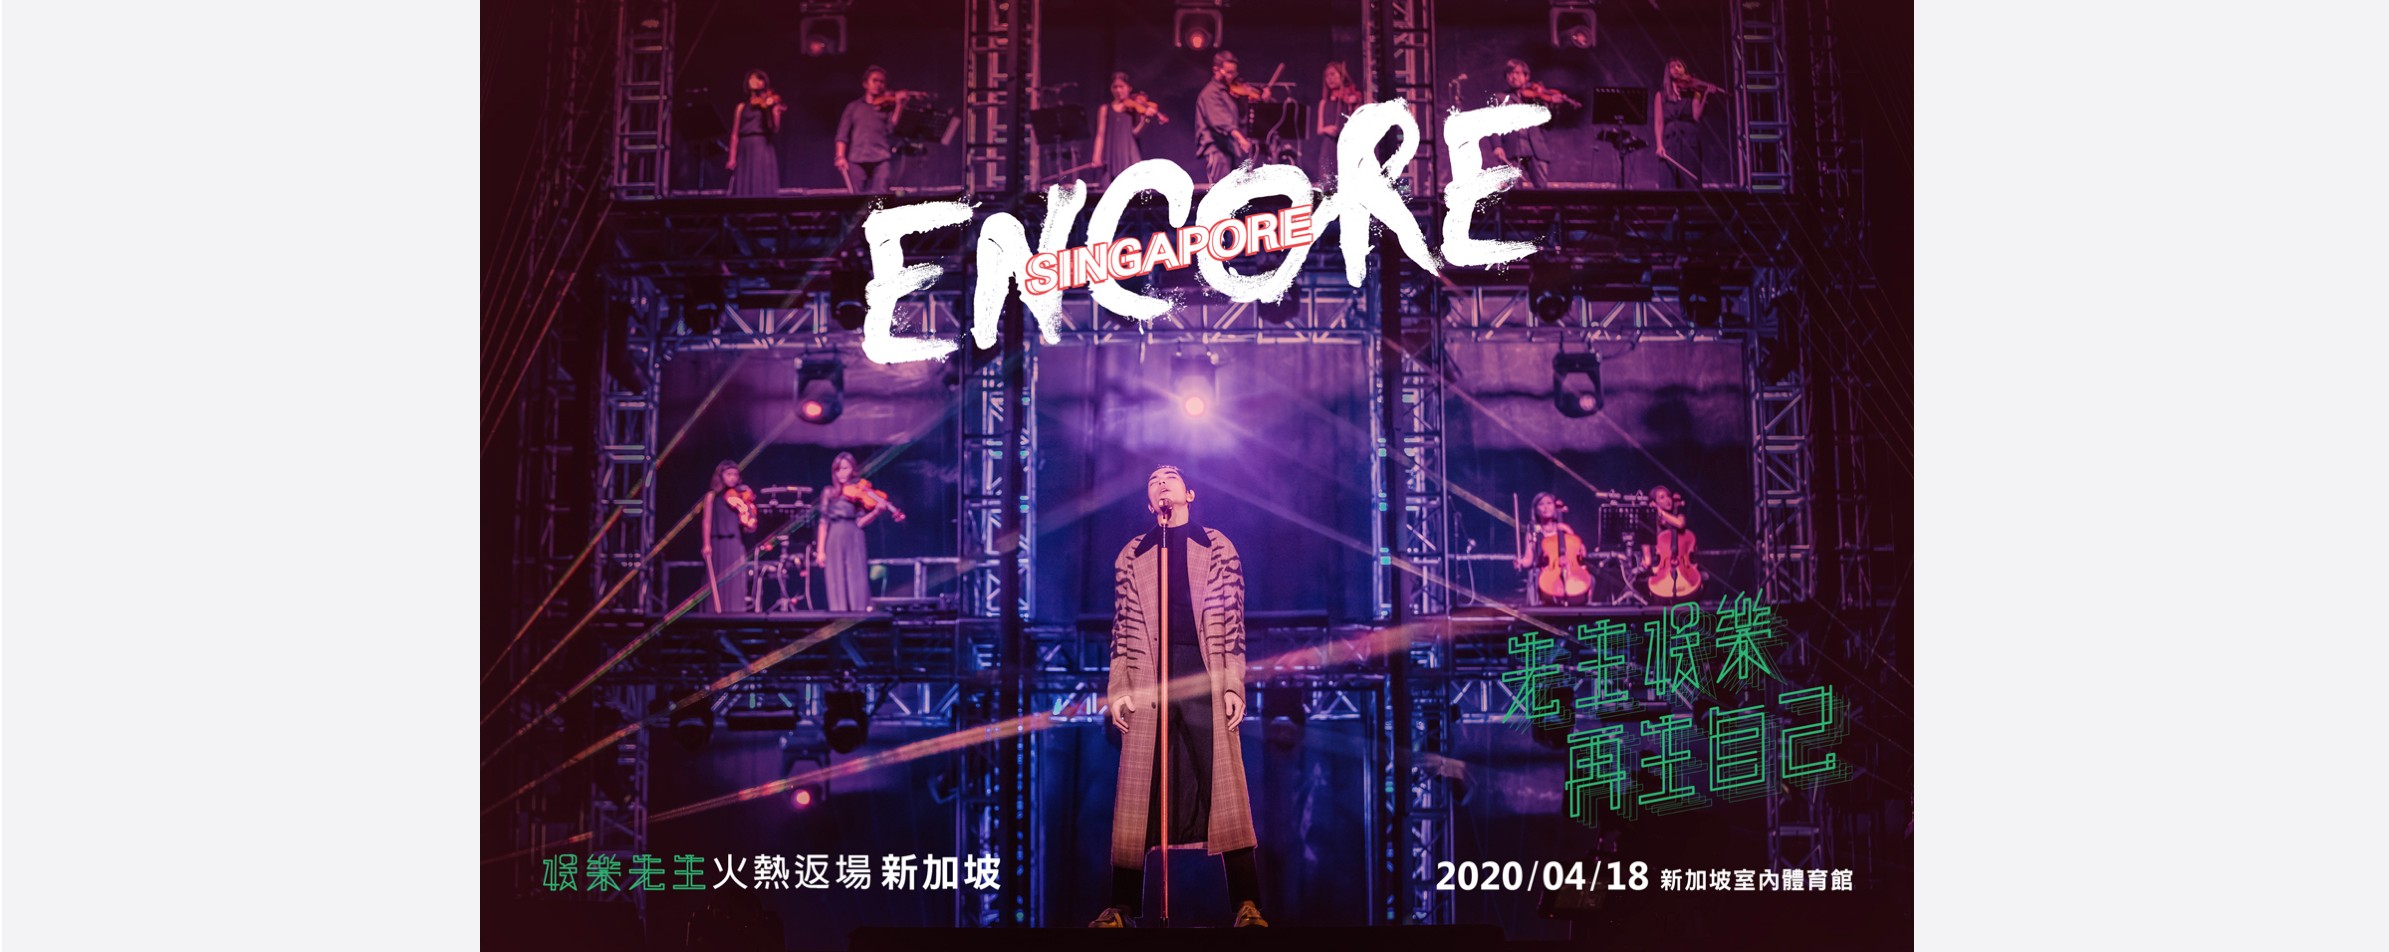 [CANCELLED] Jam Hsiao 'Mr. Entertainer' Encore Tour in Singapore